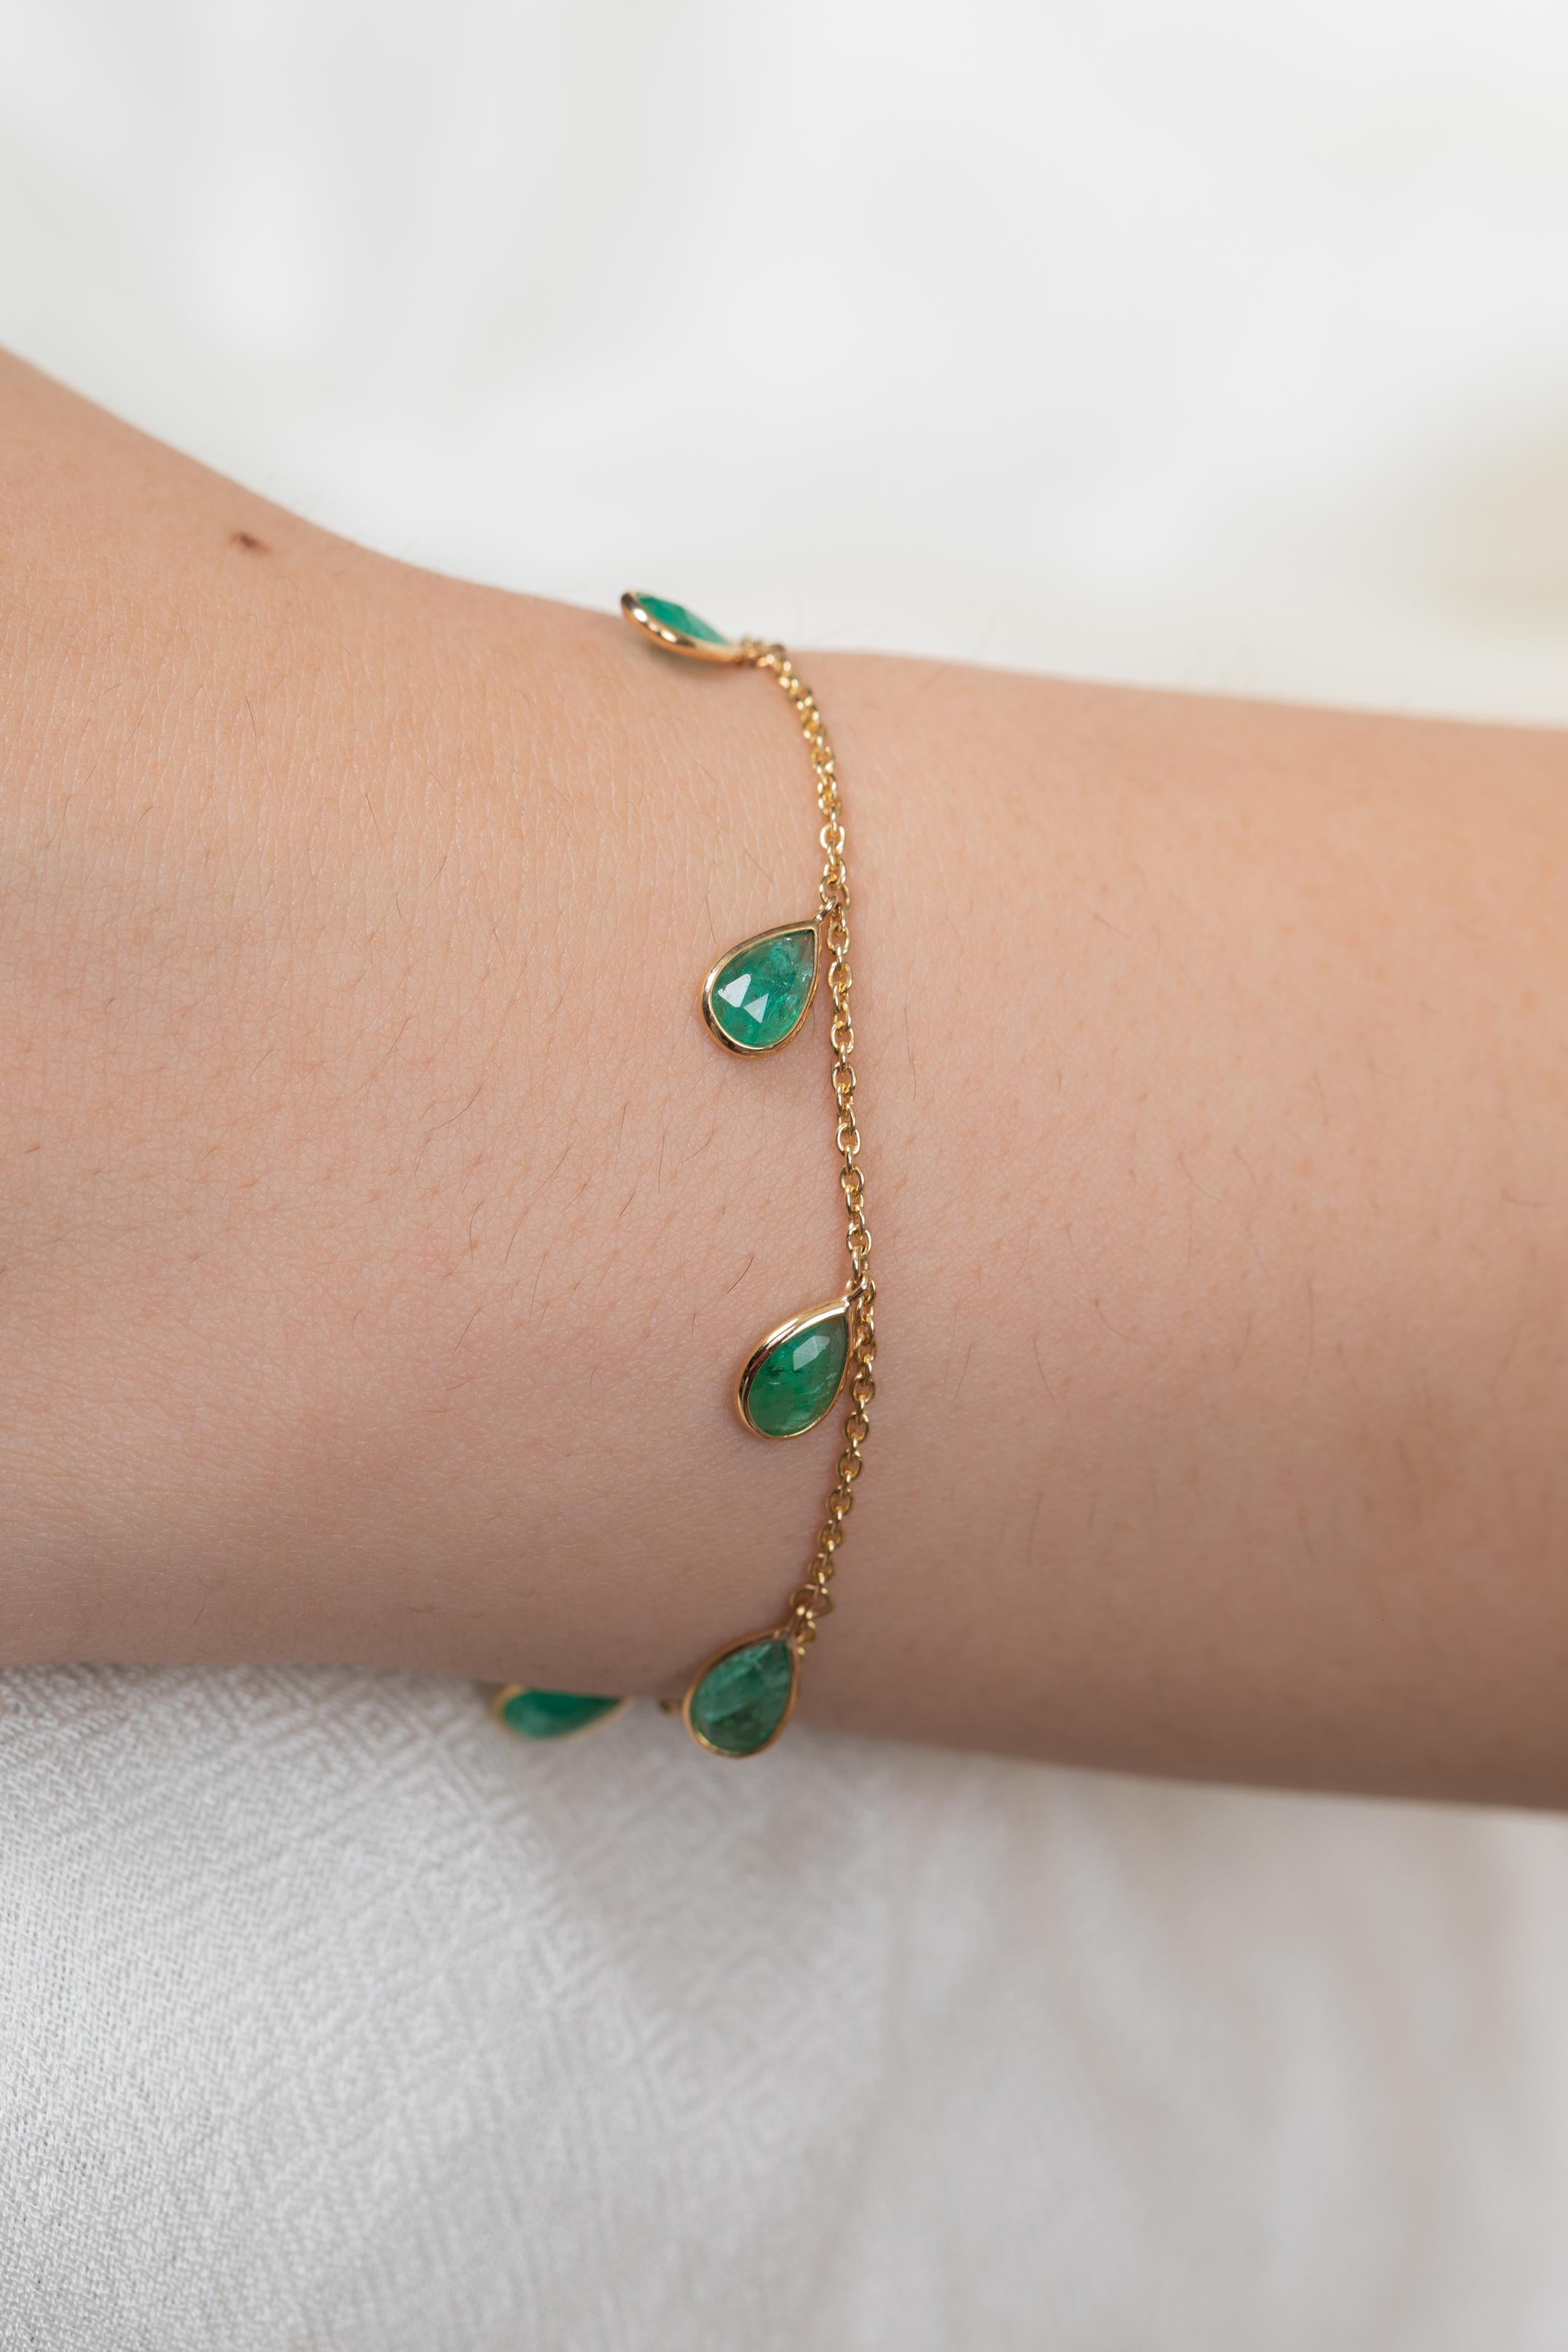 Modern Stackable Emerald Charm Chain Bracelet in 18K Yellow Gold with Lobster Clasp For Sale